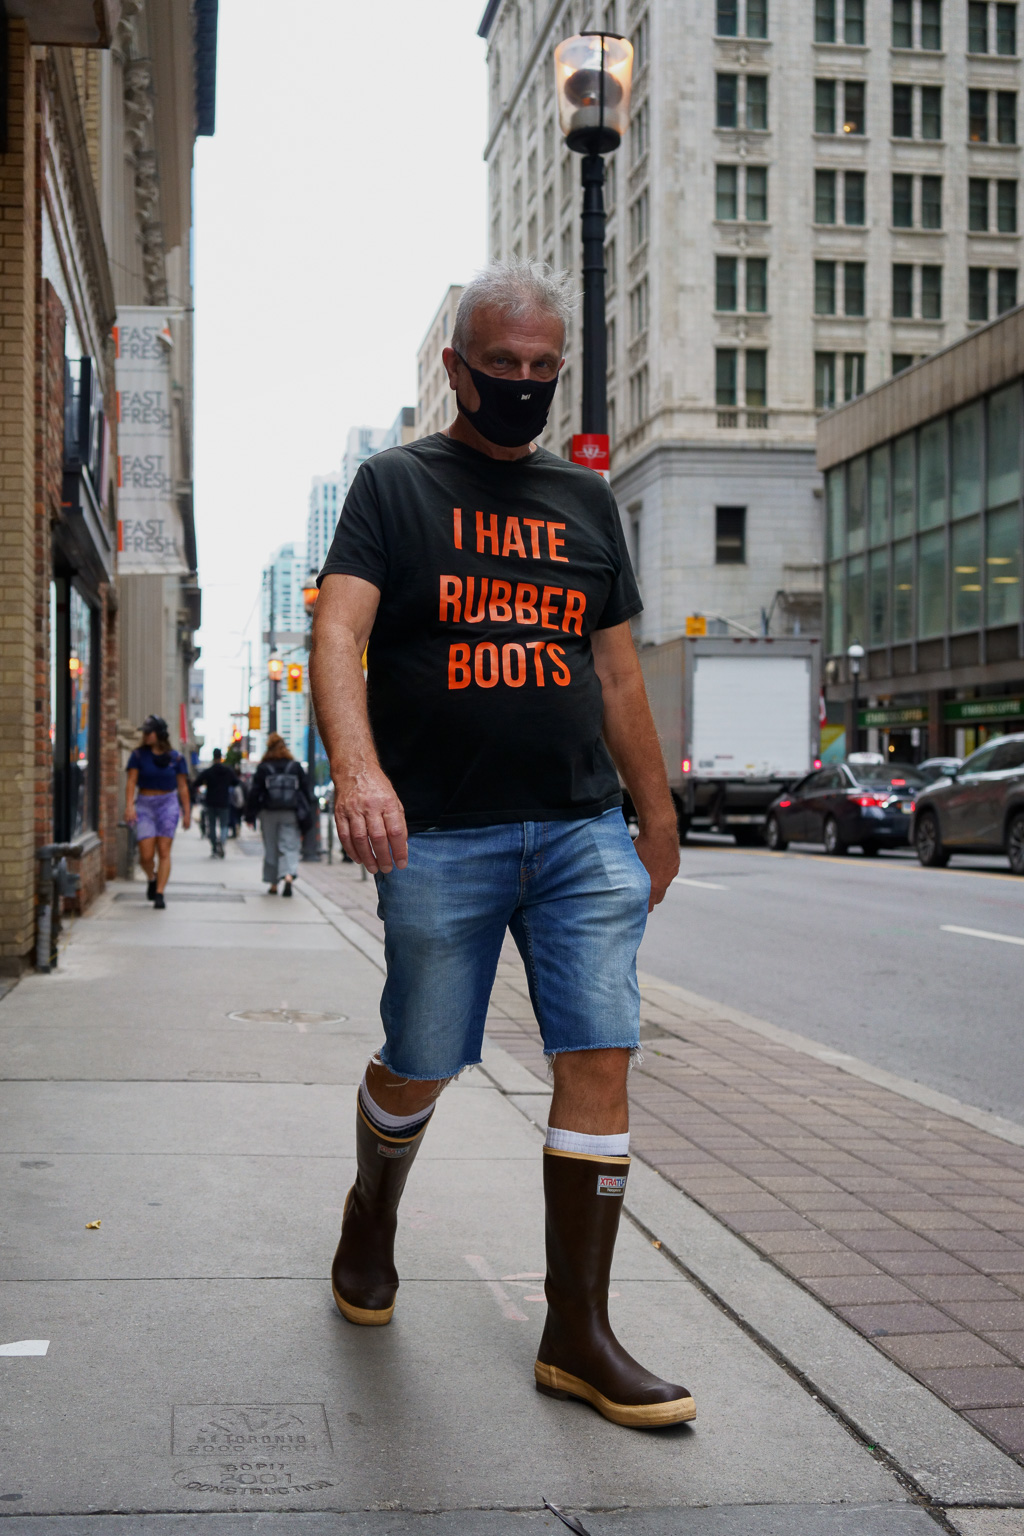 Walking up Yonge Street in Rubber Boots wearing a T-shirt that reads: "I hate rubber boots."